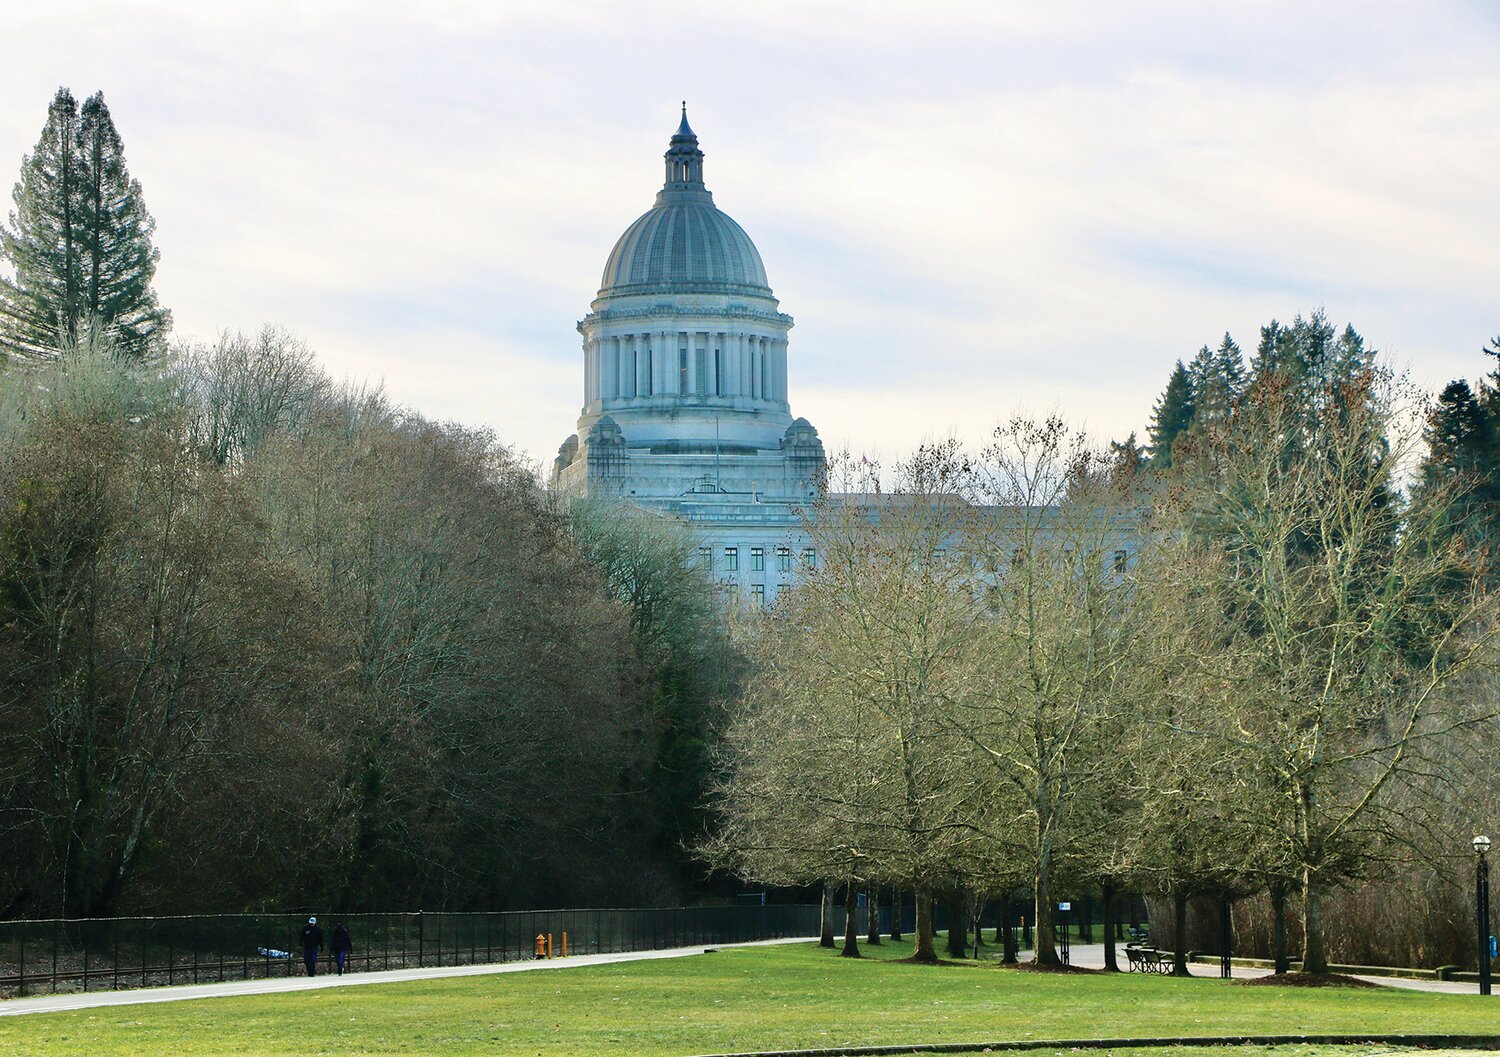 The Washington state Capitol building in Olympia.